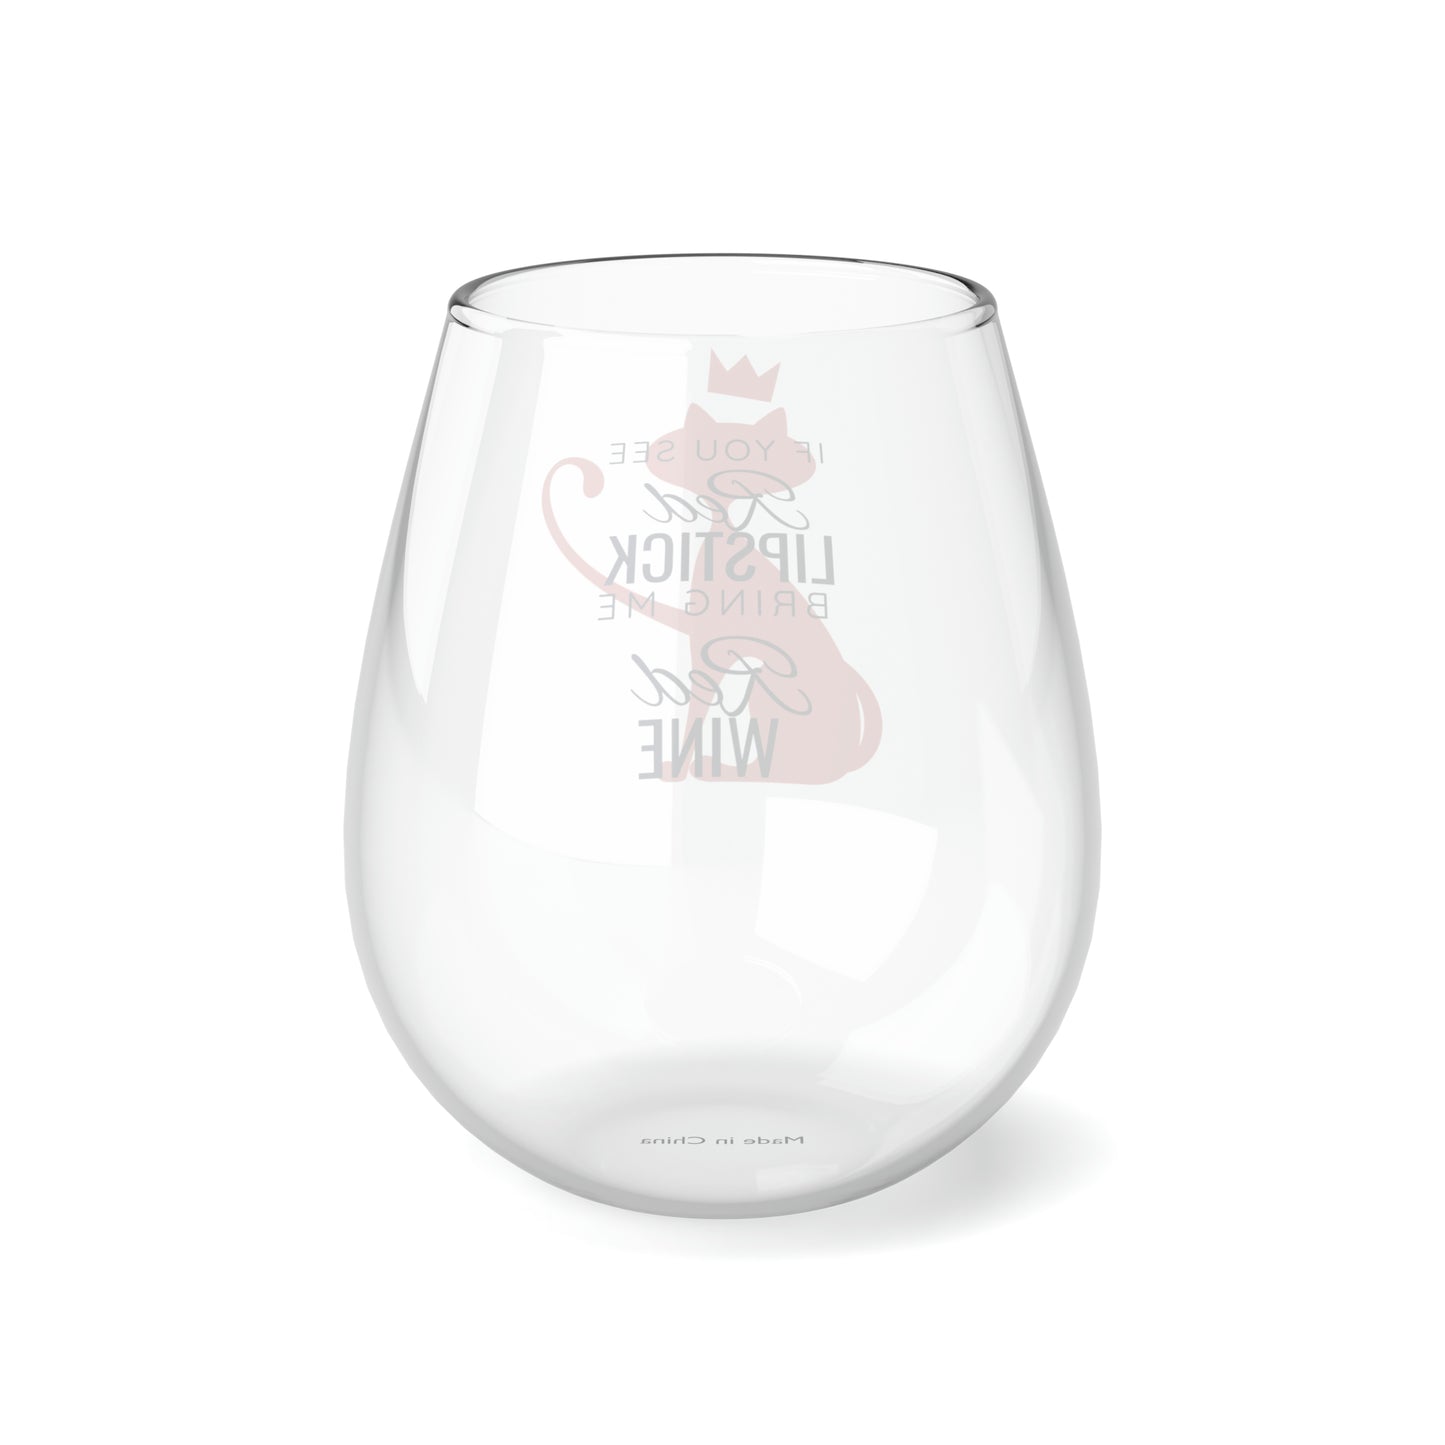 If You See Red Lipstick Bring Me Red Wine Stemless Wine Glass, 11.75oz